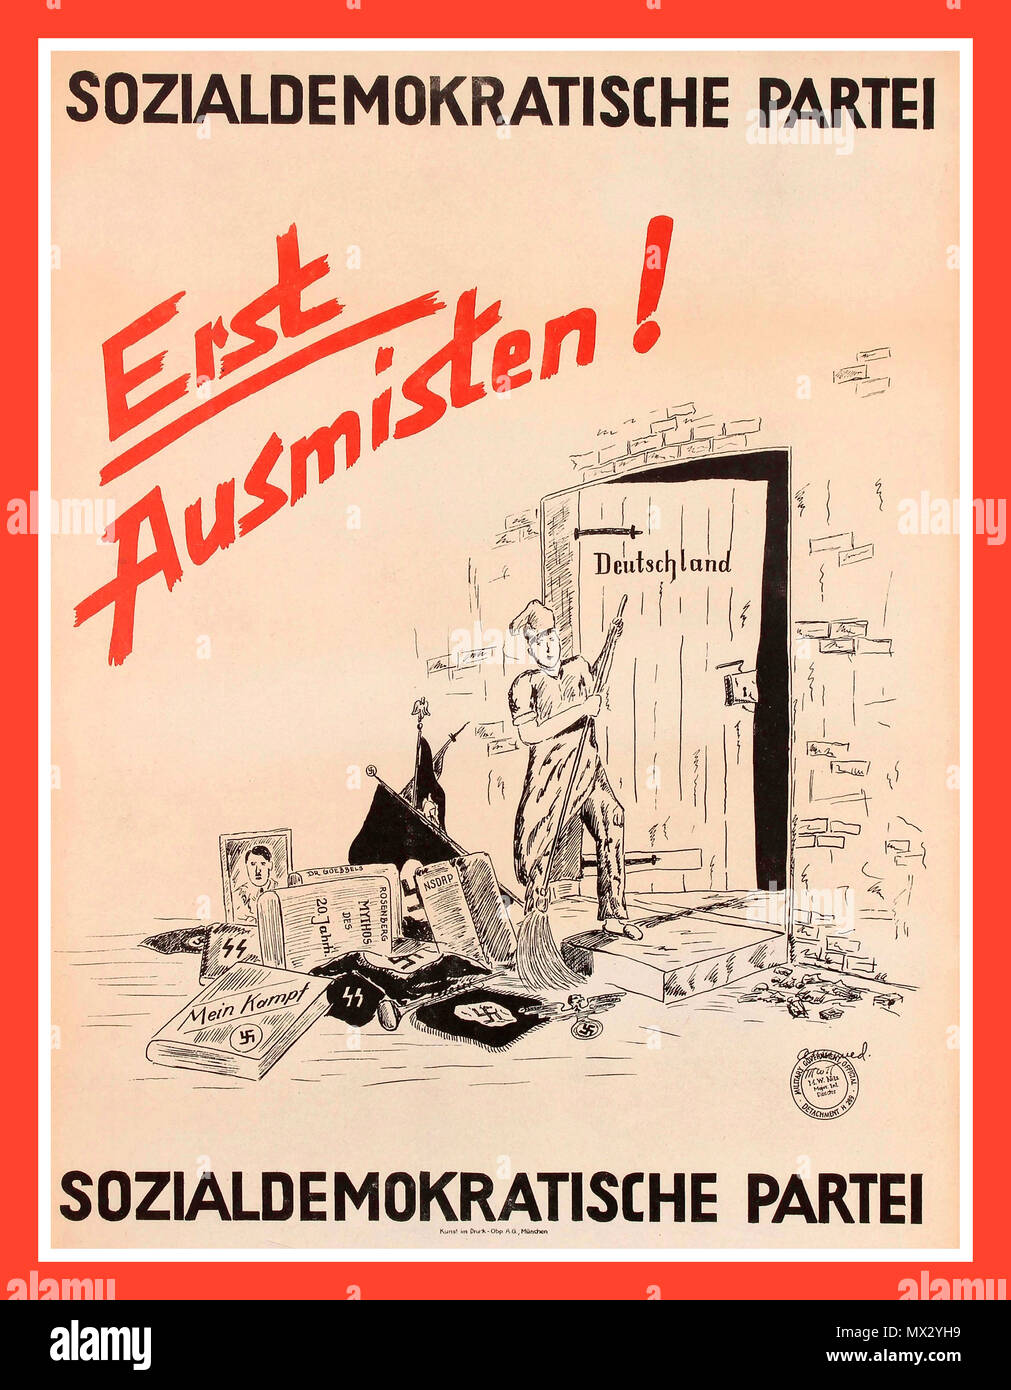 POST WAR GERMANY Vintage 1945 Germany after WW2 World War Two propaganda poster: Erst Ausmisten! Shows Germany being cleared from Nazi political memorabilia and Adolf Hitler's Mein Kampf. Issued by the Social Democratic Party of Germany . 1945 Stock Photo